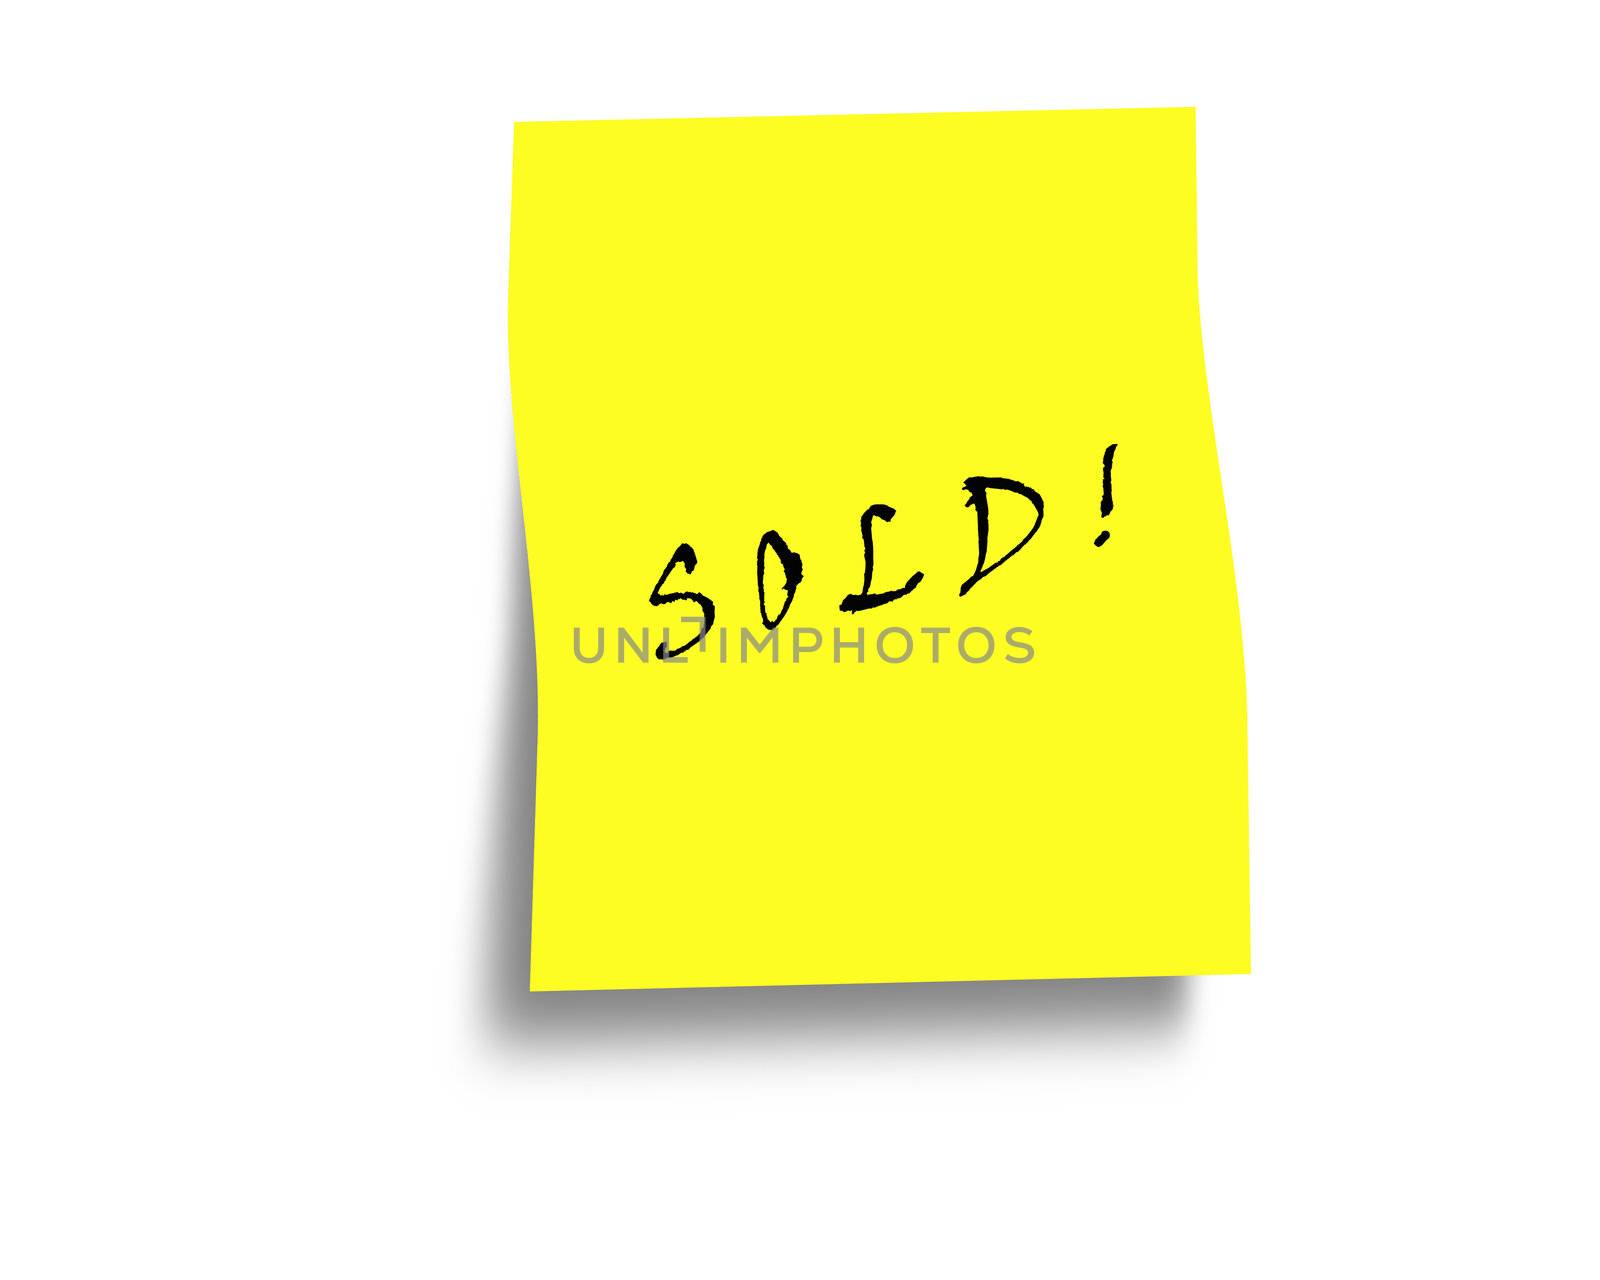 Sold notice on a yellow post it note with copy space.